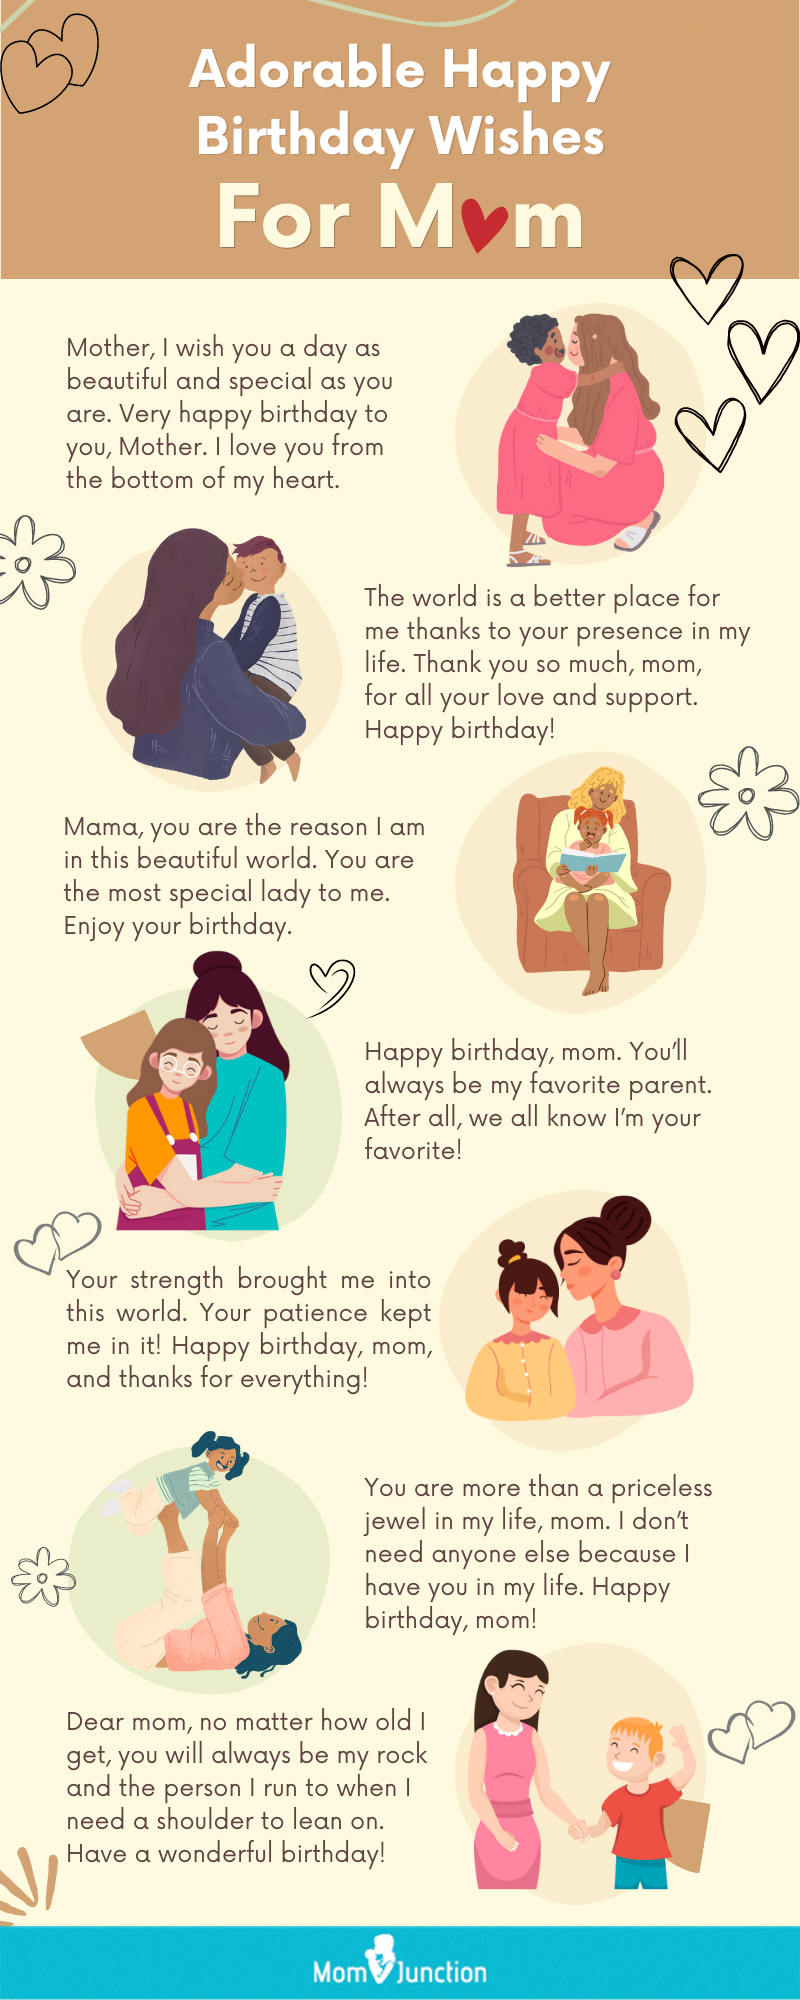 happy birthday wishes for mom (infographic)